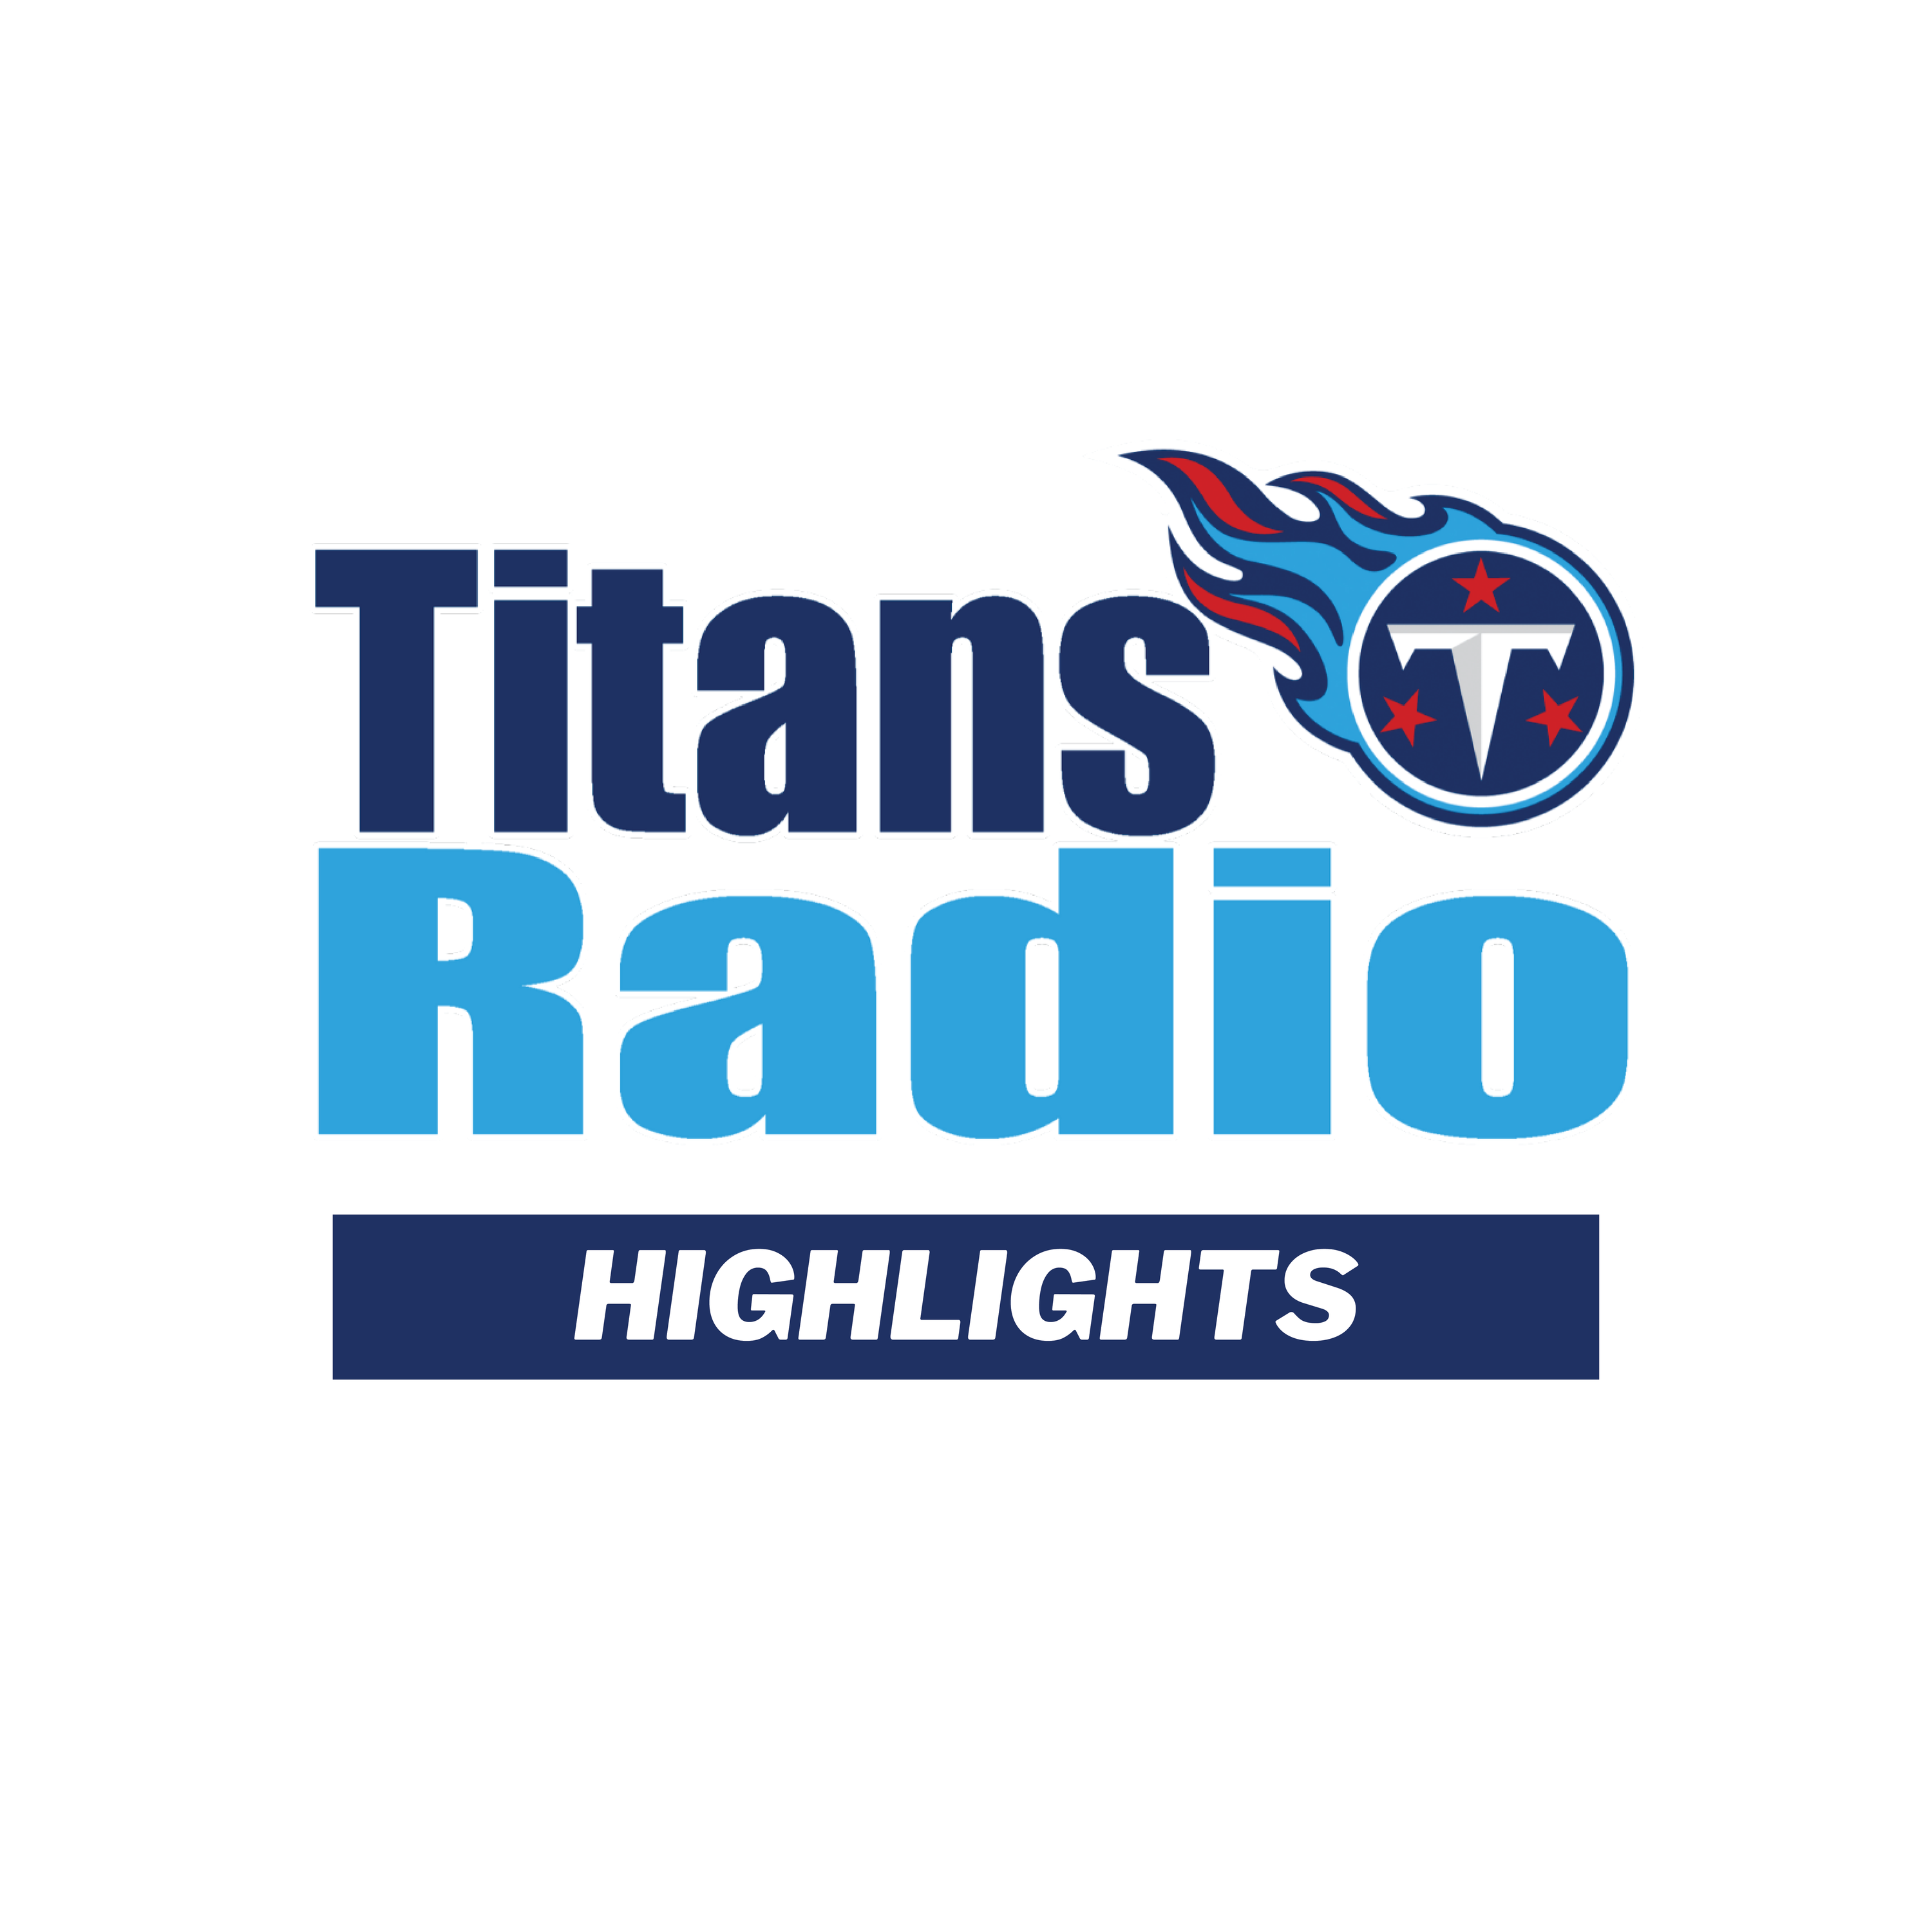 Titans vs Dolphins FINAL CALL - The Titans Get It Done For Frankie